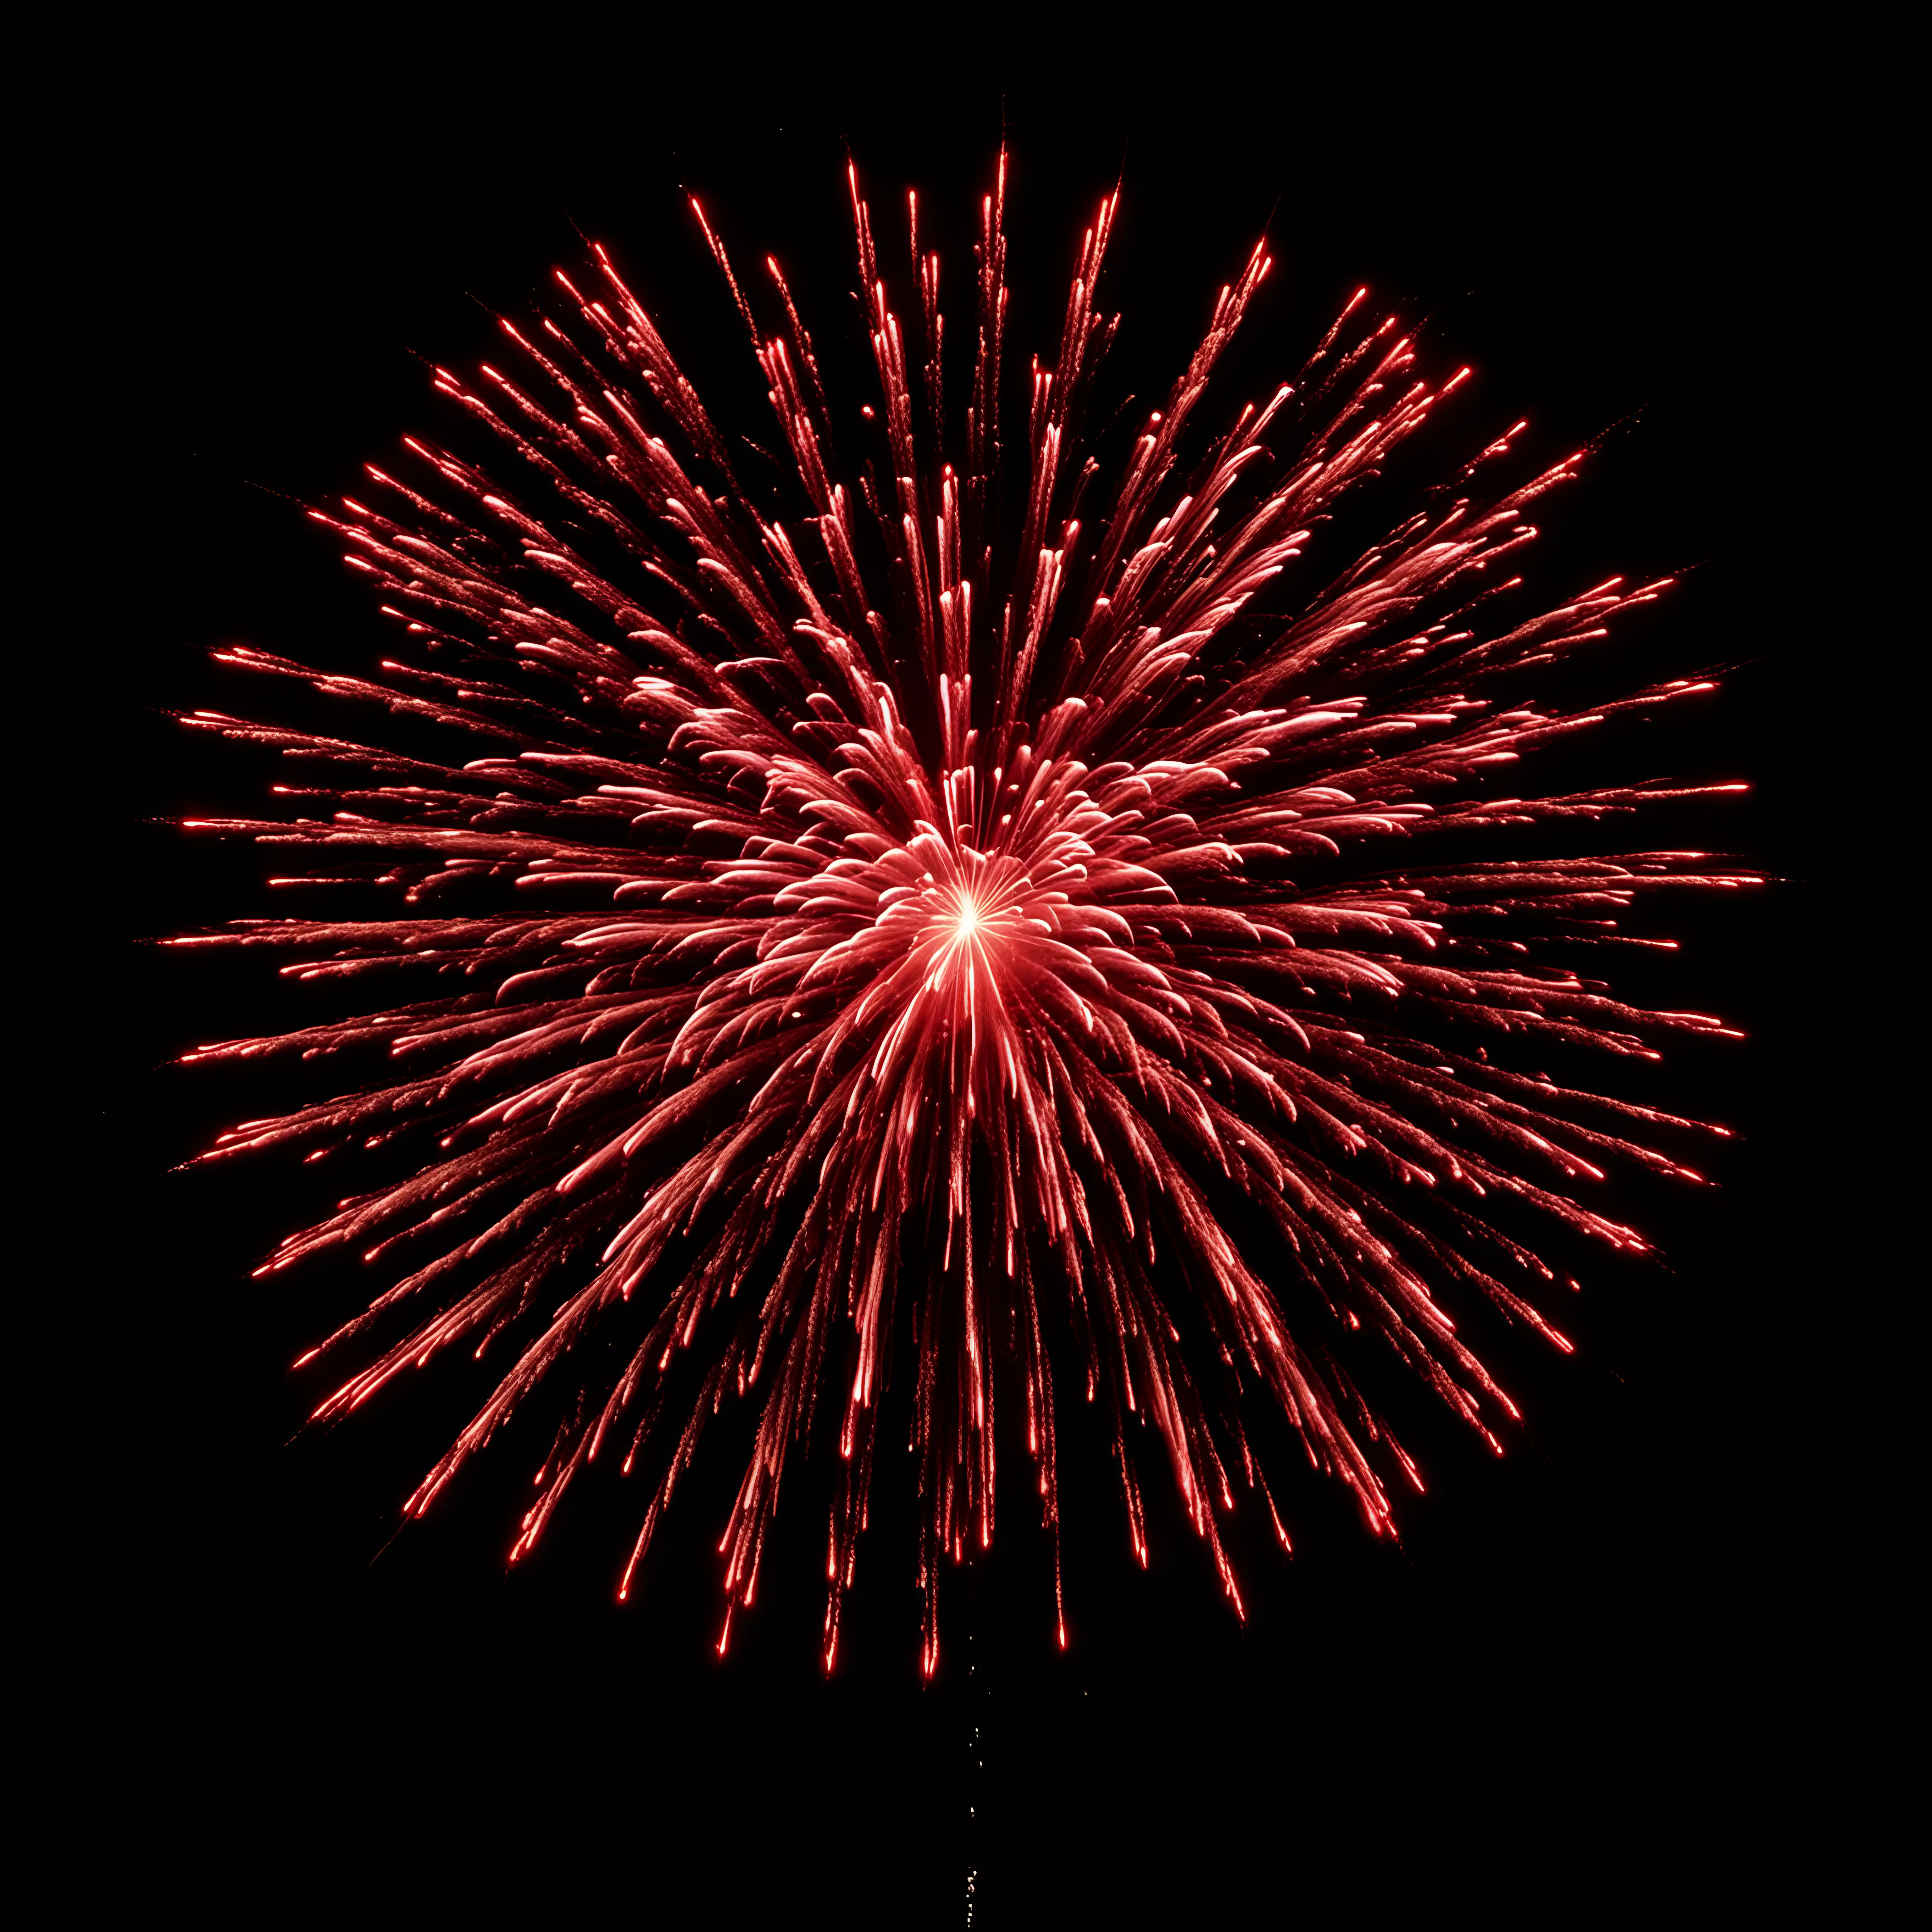 Red Fireworks with PURE black background